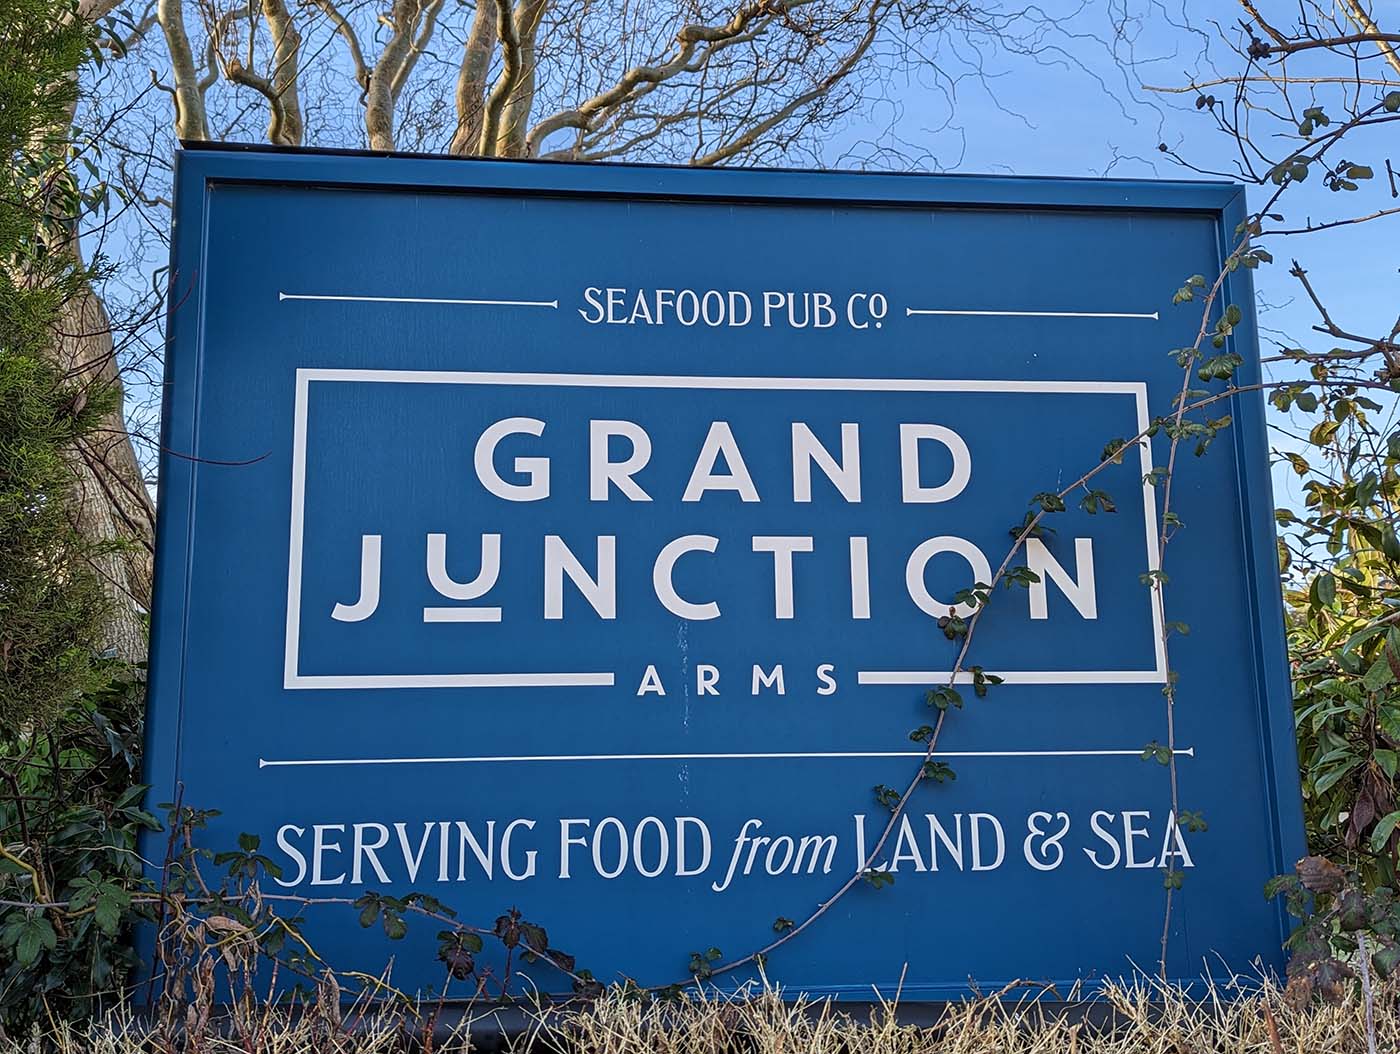 Grand Junction Arms 1